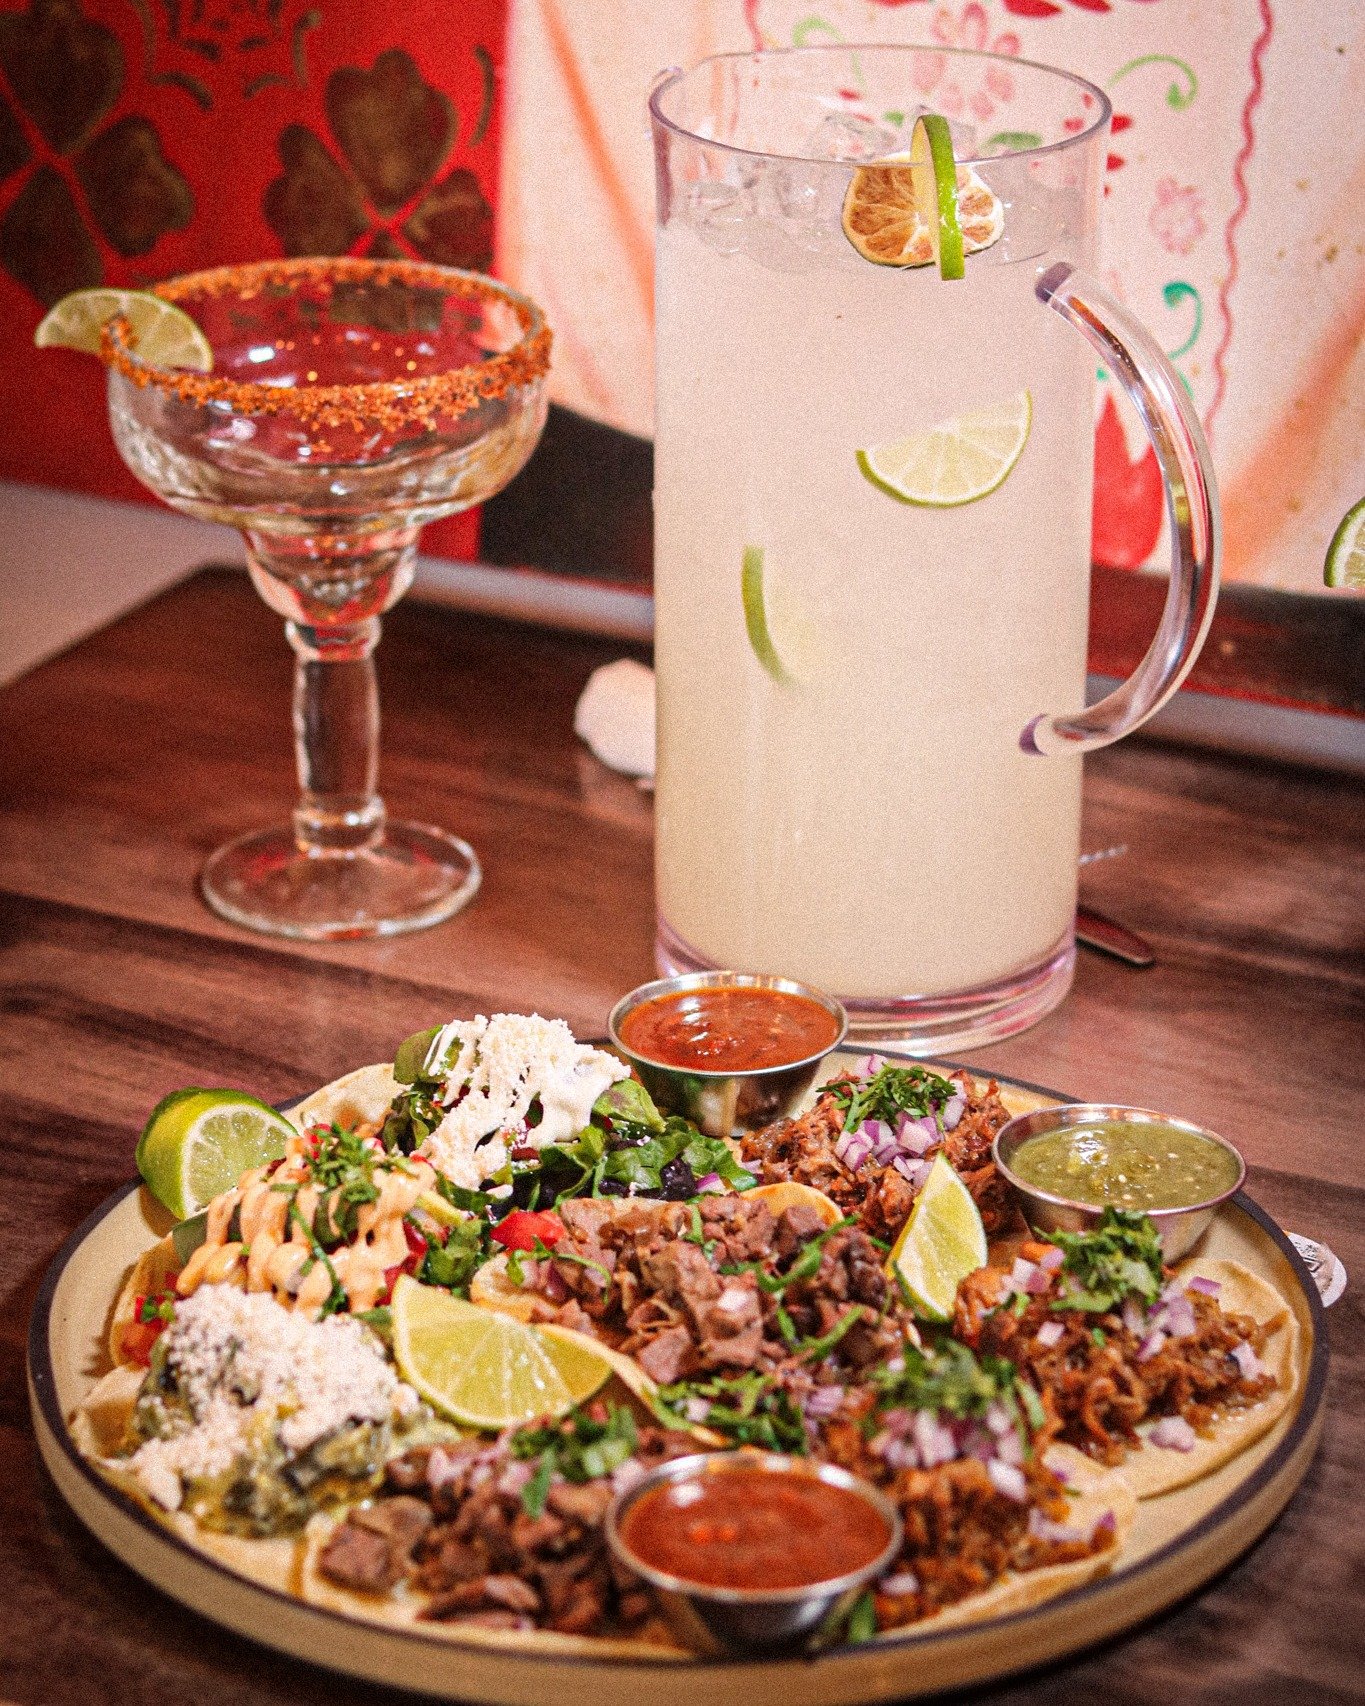 🎉 Spice up your Wednesday with our Cantina Nights! Enjoy our special Margarita Pitchers 🍹 and your favorite Tacos 🌮 and Burritos 🌯 at prices that sizzle! #CantinaNights #MargaritaMadness